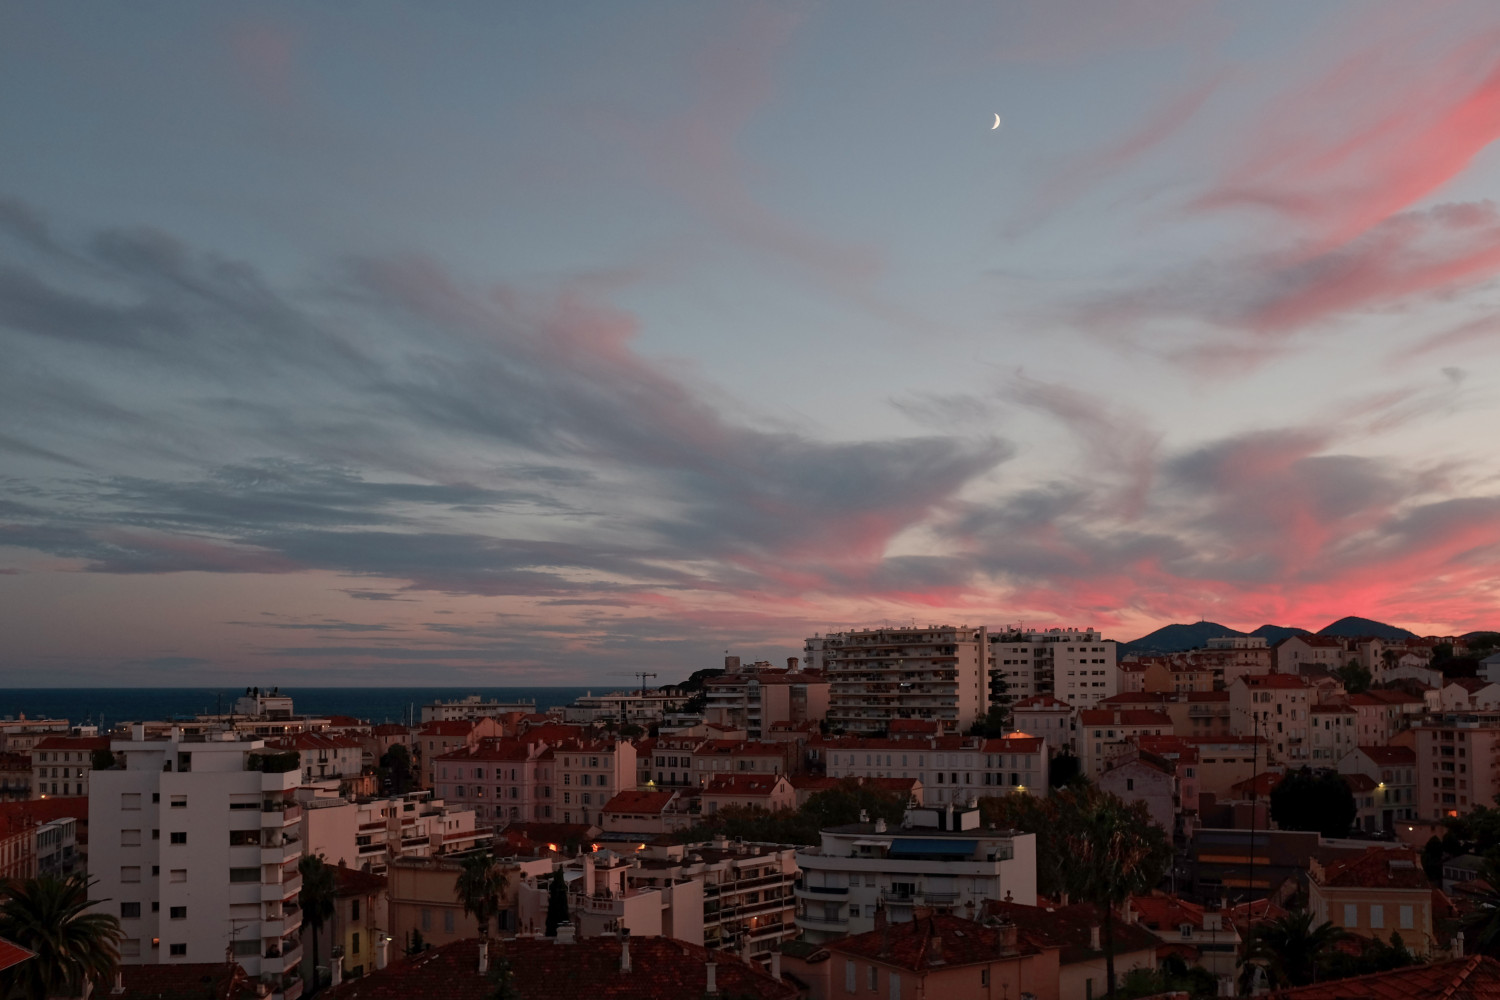 Waxing crescent moon over Cannes